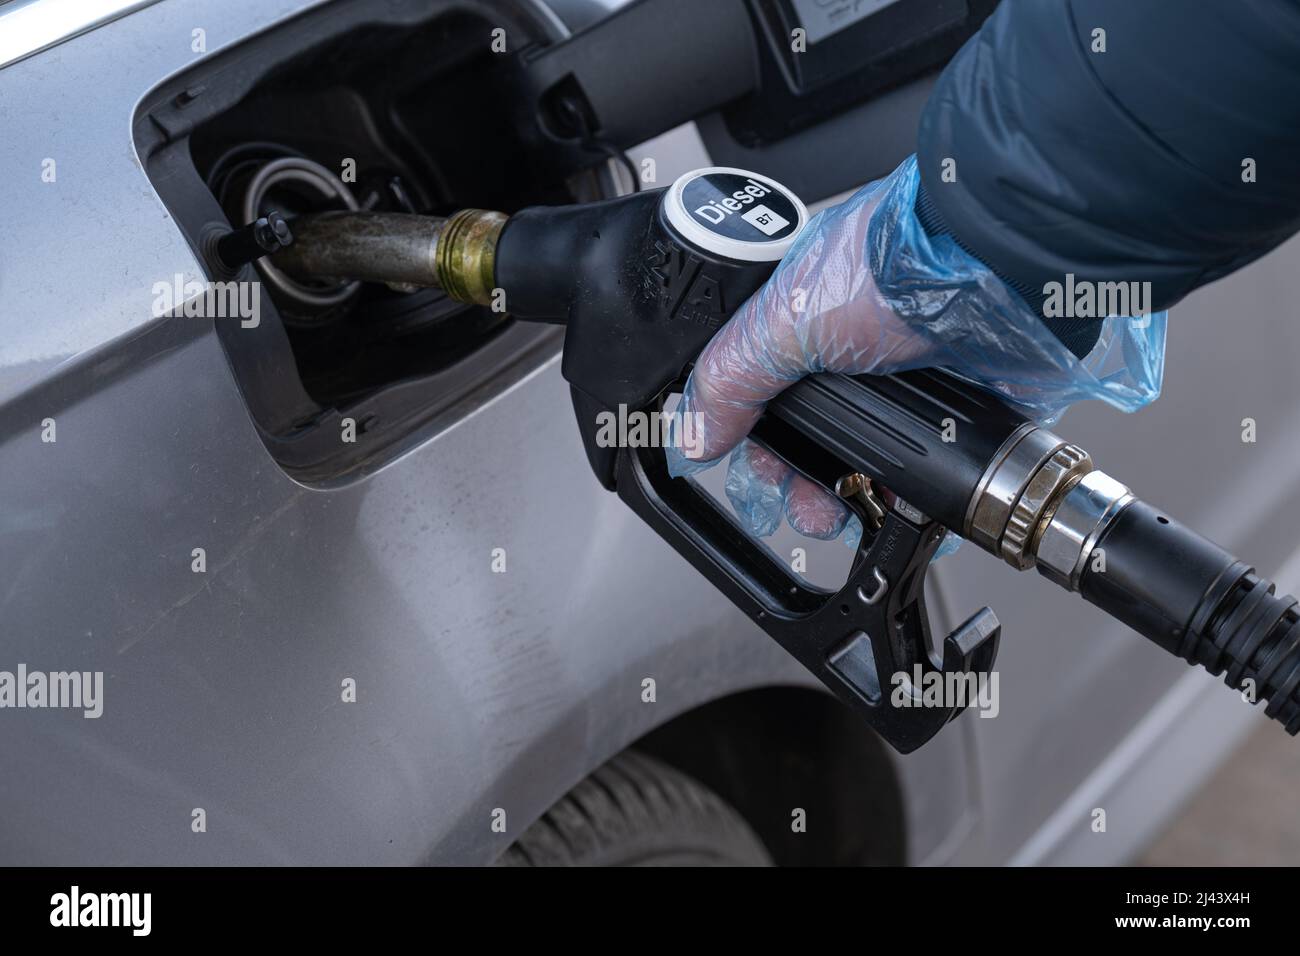 Diesel. Refueling the car.Refueling pistol in the hands of a man in a glove.A man fills up a car tank  Stock Photo